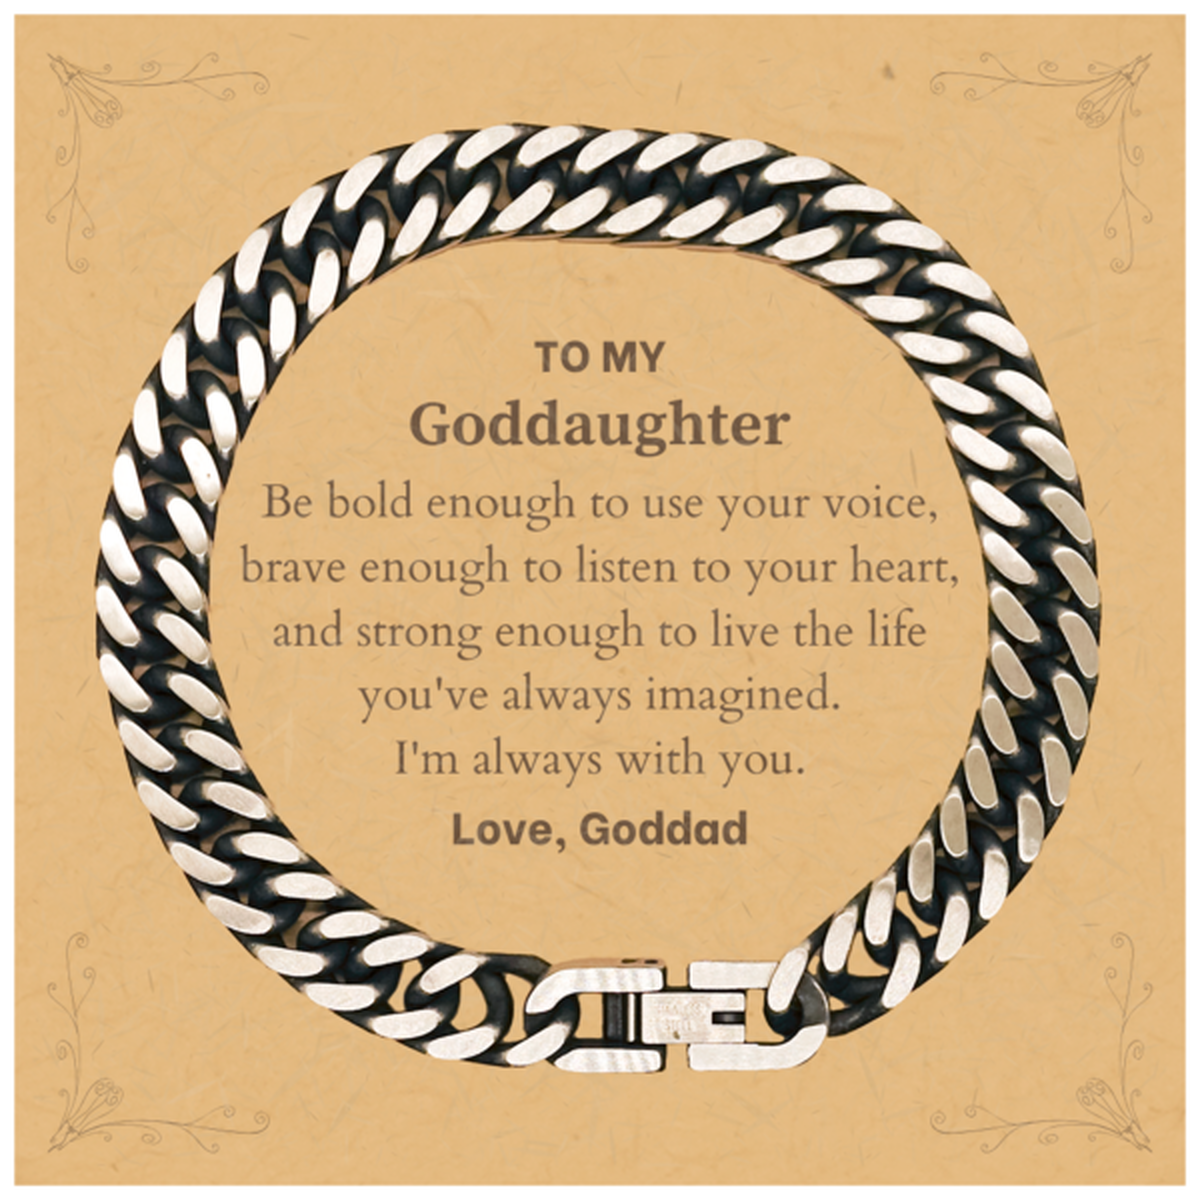 Keepsake Goddaughter Cuban Link Chain Bracelet Gift Idea Graduation Christmas Birthday Goddaughter from Goddad, Goddaughter Be bold enough to use your voice, brave enough to listen to your heart. Love, Goddad